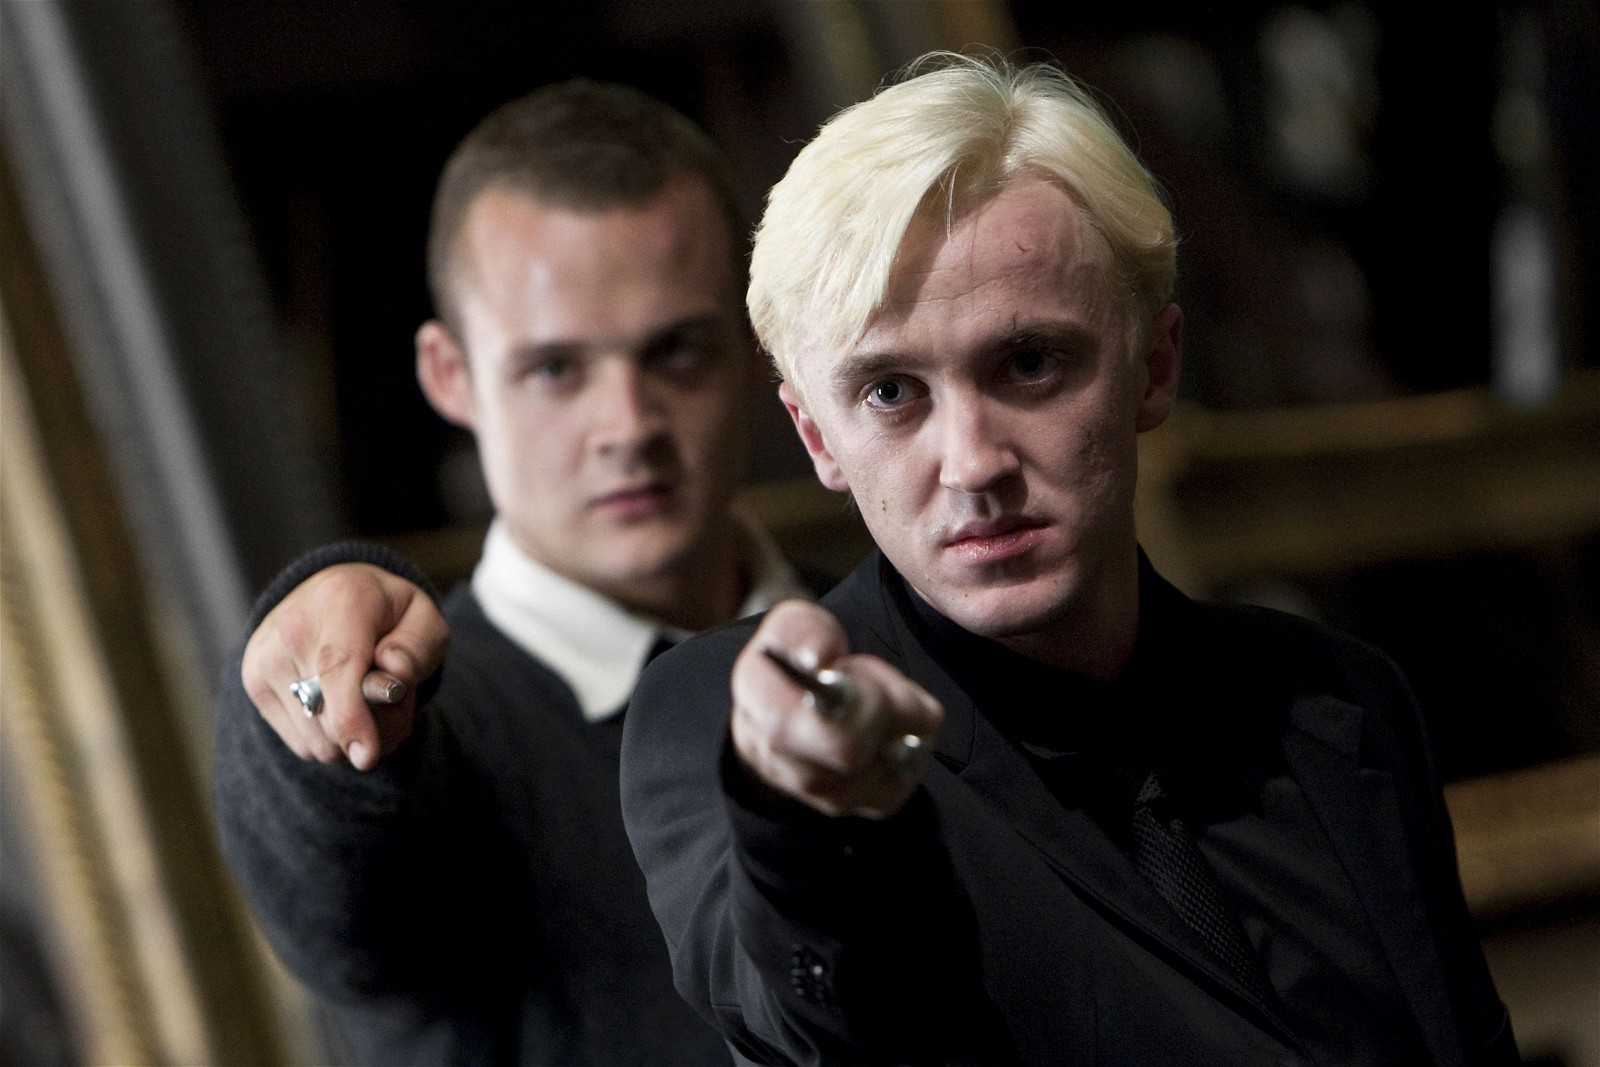 Tom Felton last played Draco Malfoy in Harry Potter and the Deathly Hallows: Part 2 